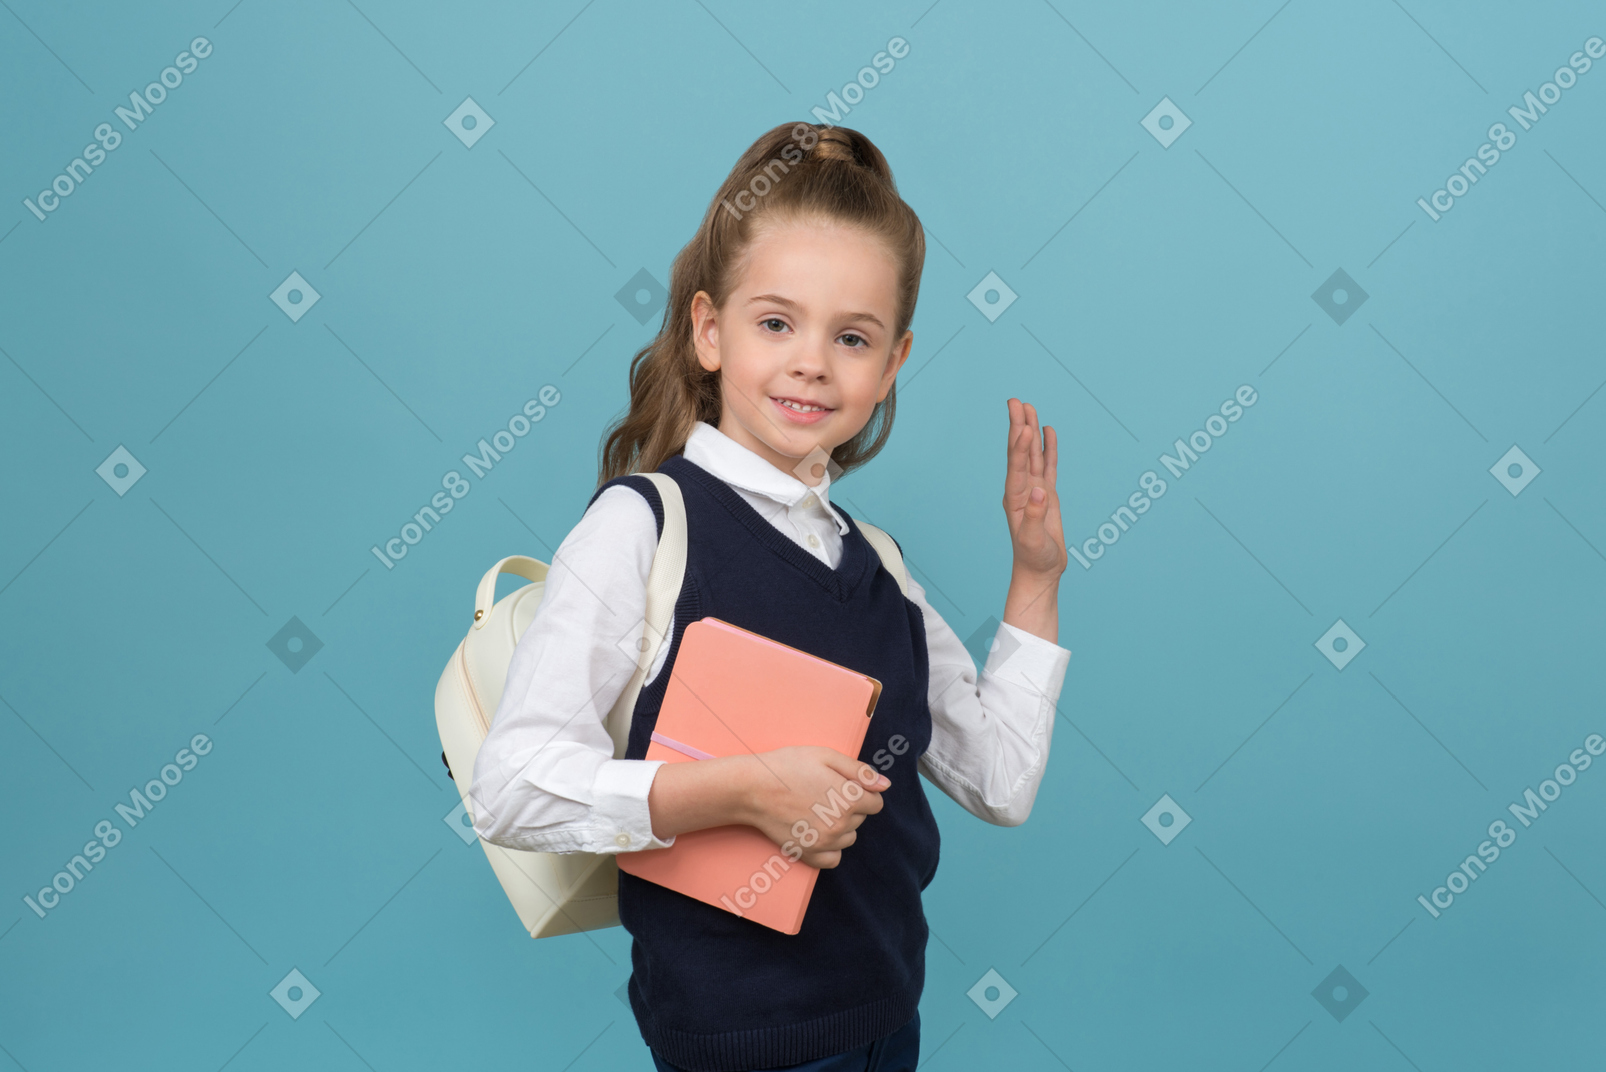 Smiling litlle schoolgirl holding a book and waving